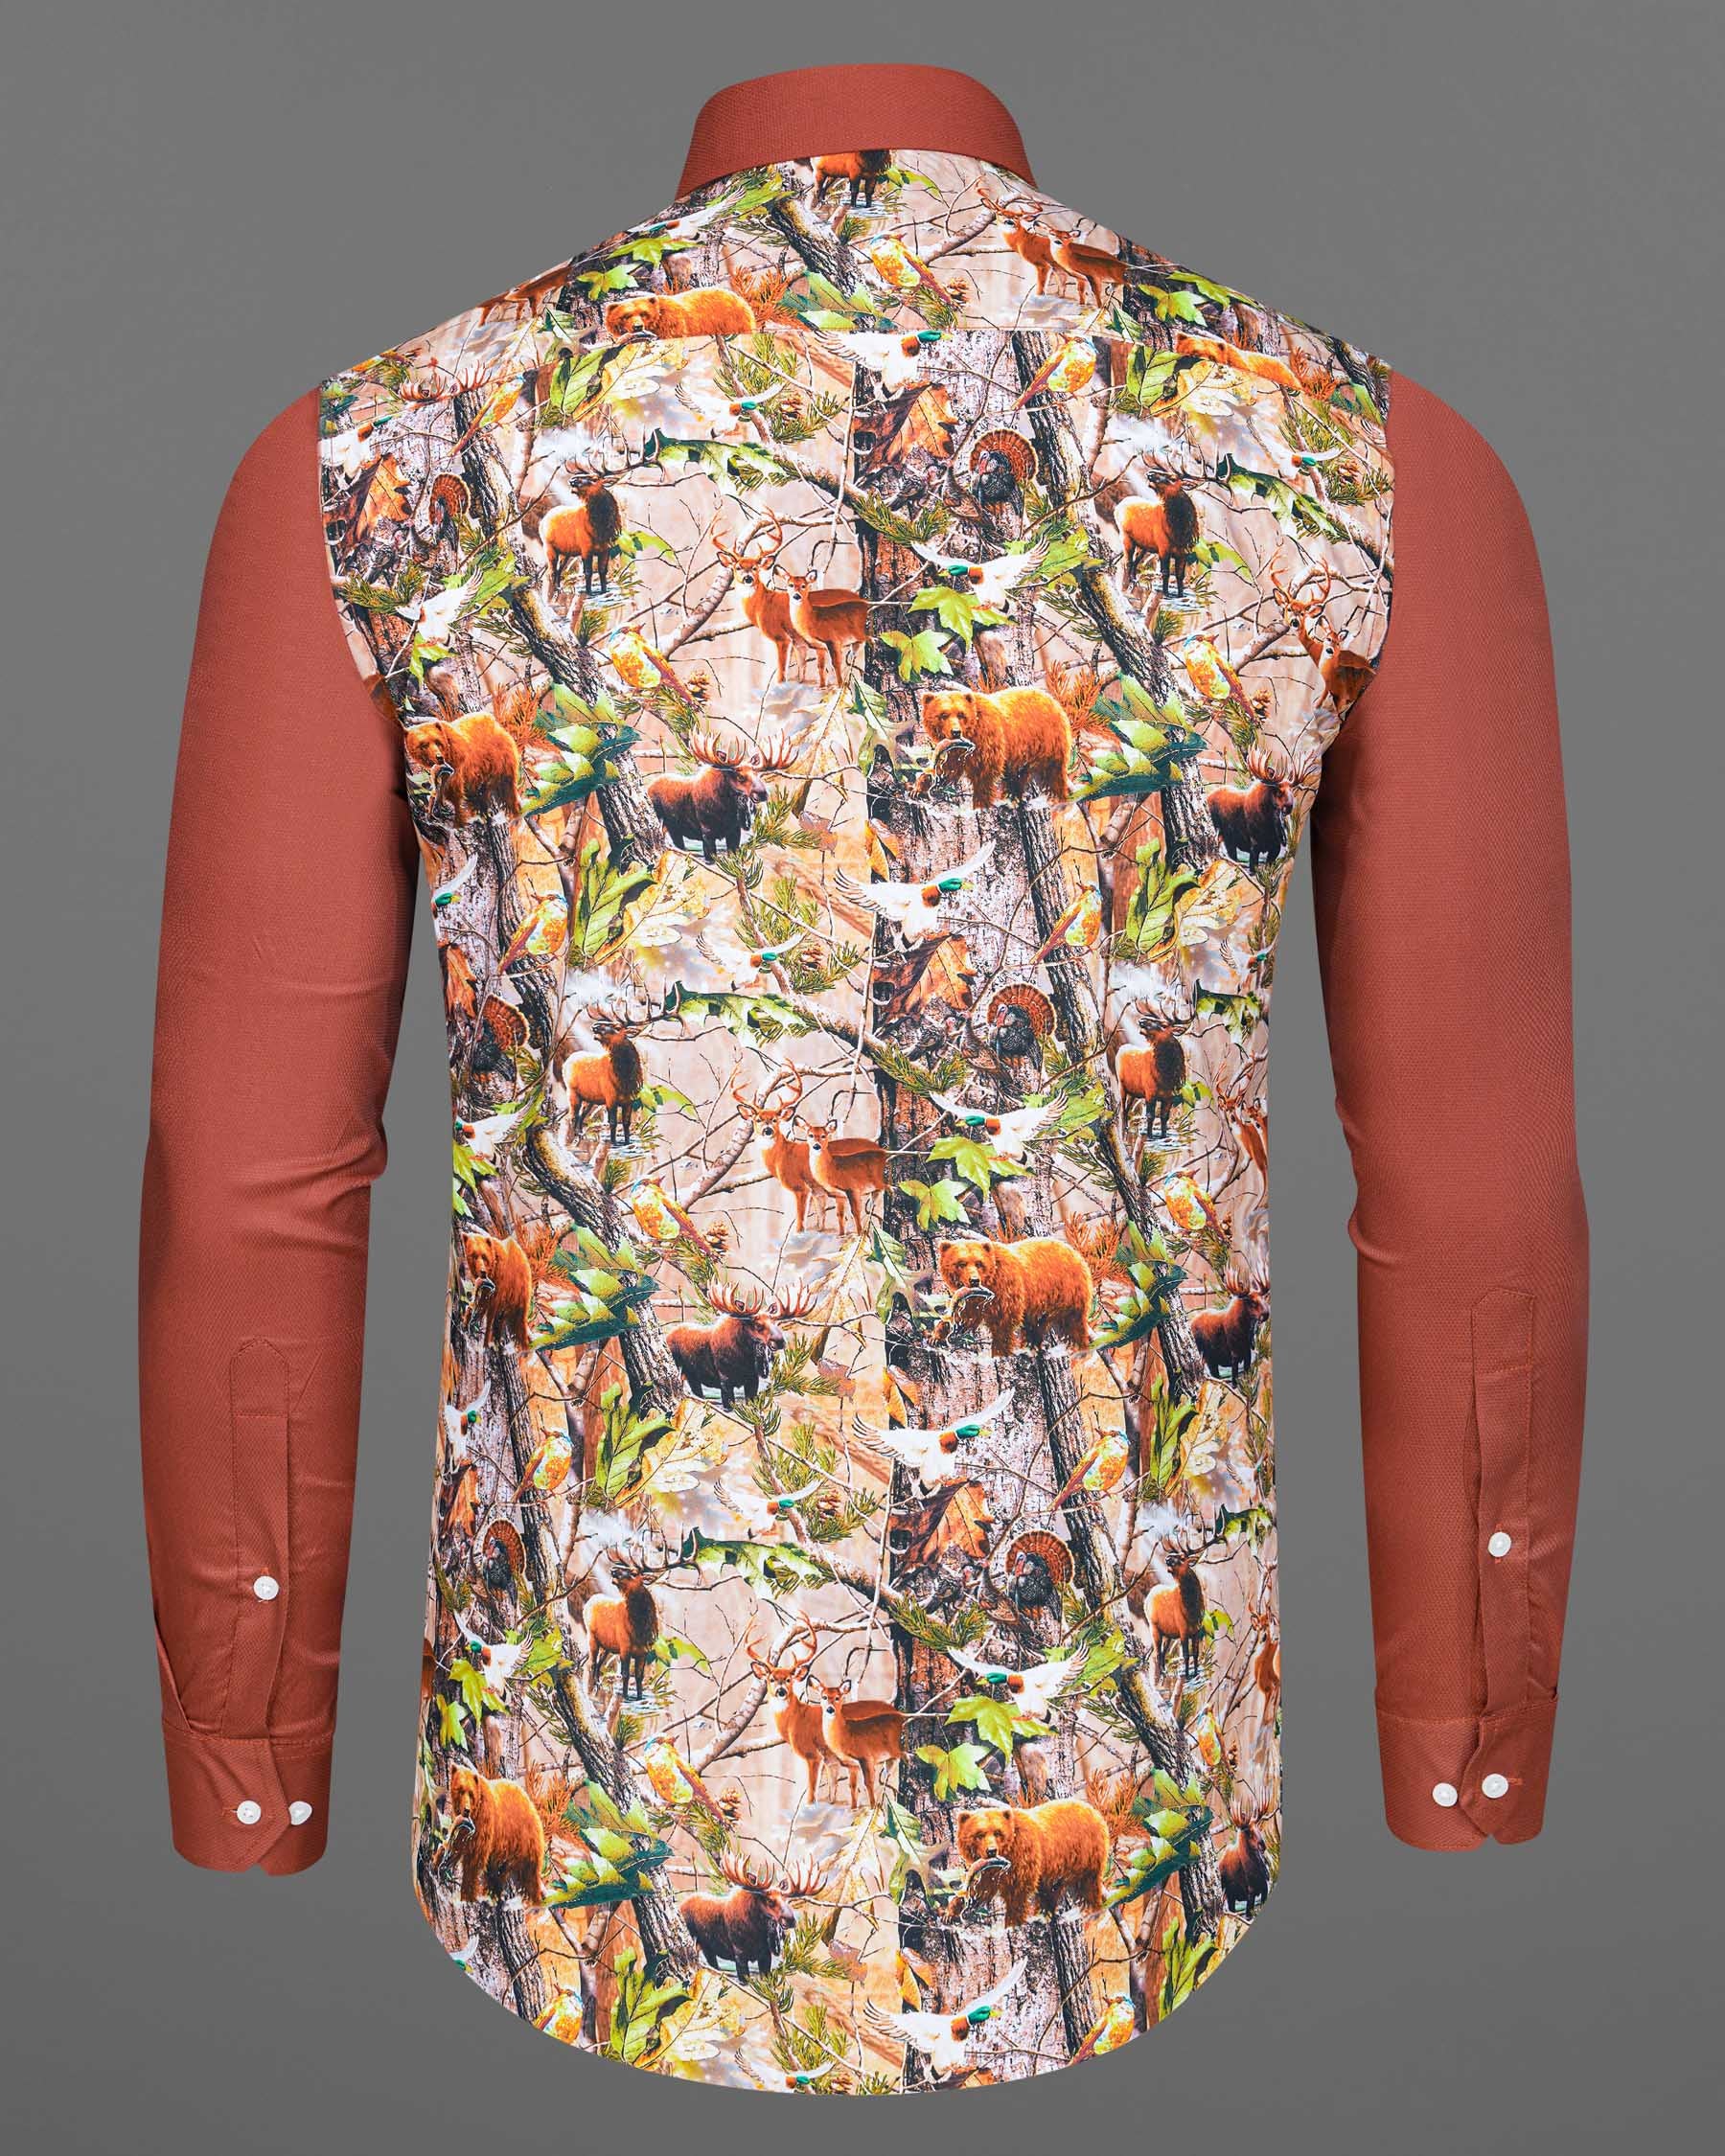 Sepia Rose with Back Tropical Printed Dobby Textured Designer Shirt 7433-38,7433-38,7433-39,7433-39,7433-40,7433-40,7433-42,7433-42,7433-44,7433-44,7433-46,7433-46,7433-48,7433-48,7433-50,7433-50,7433-52,7433-52